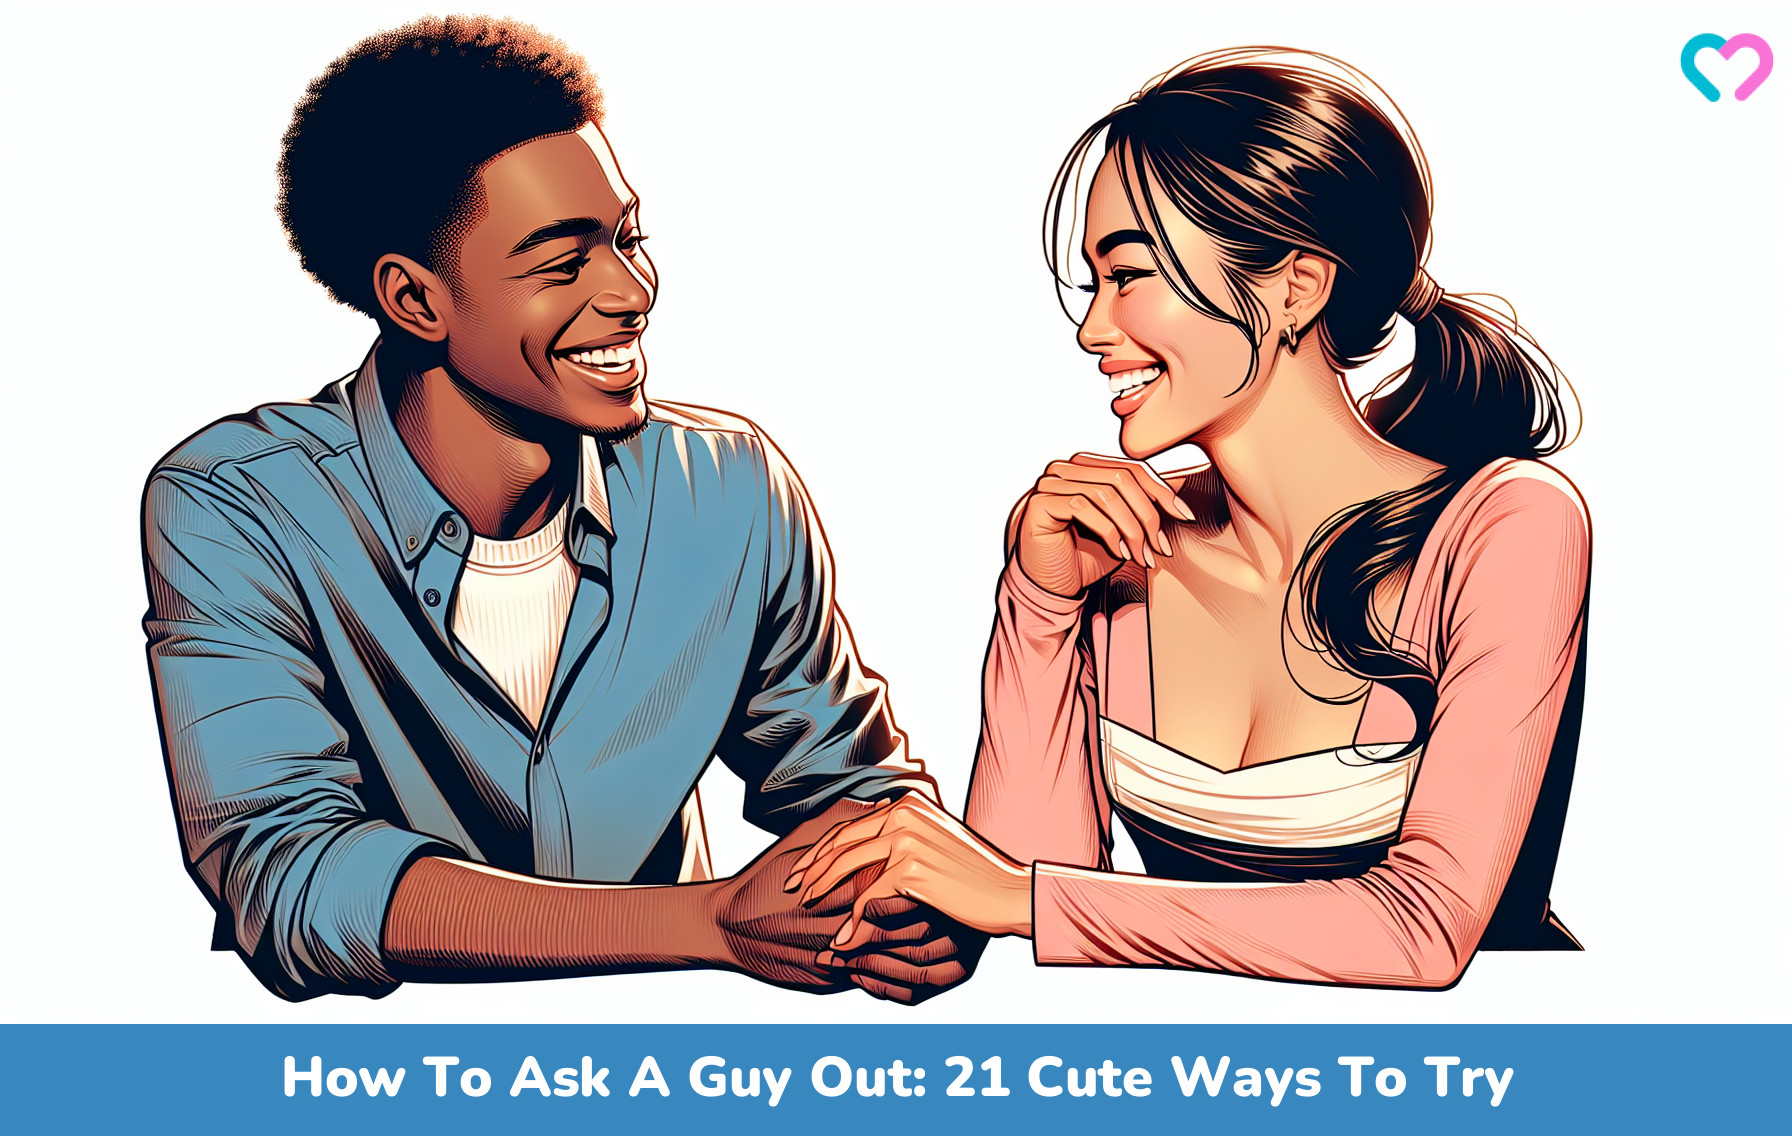 3 Ways to Give a Guy an Answer when He Asks You Out - wikiHow